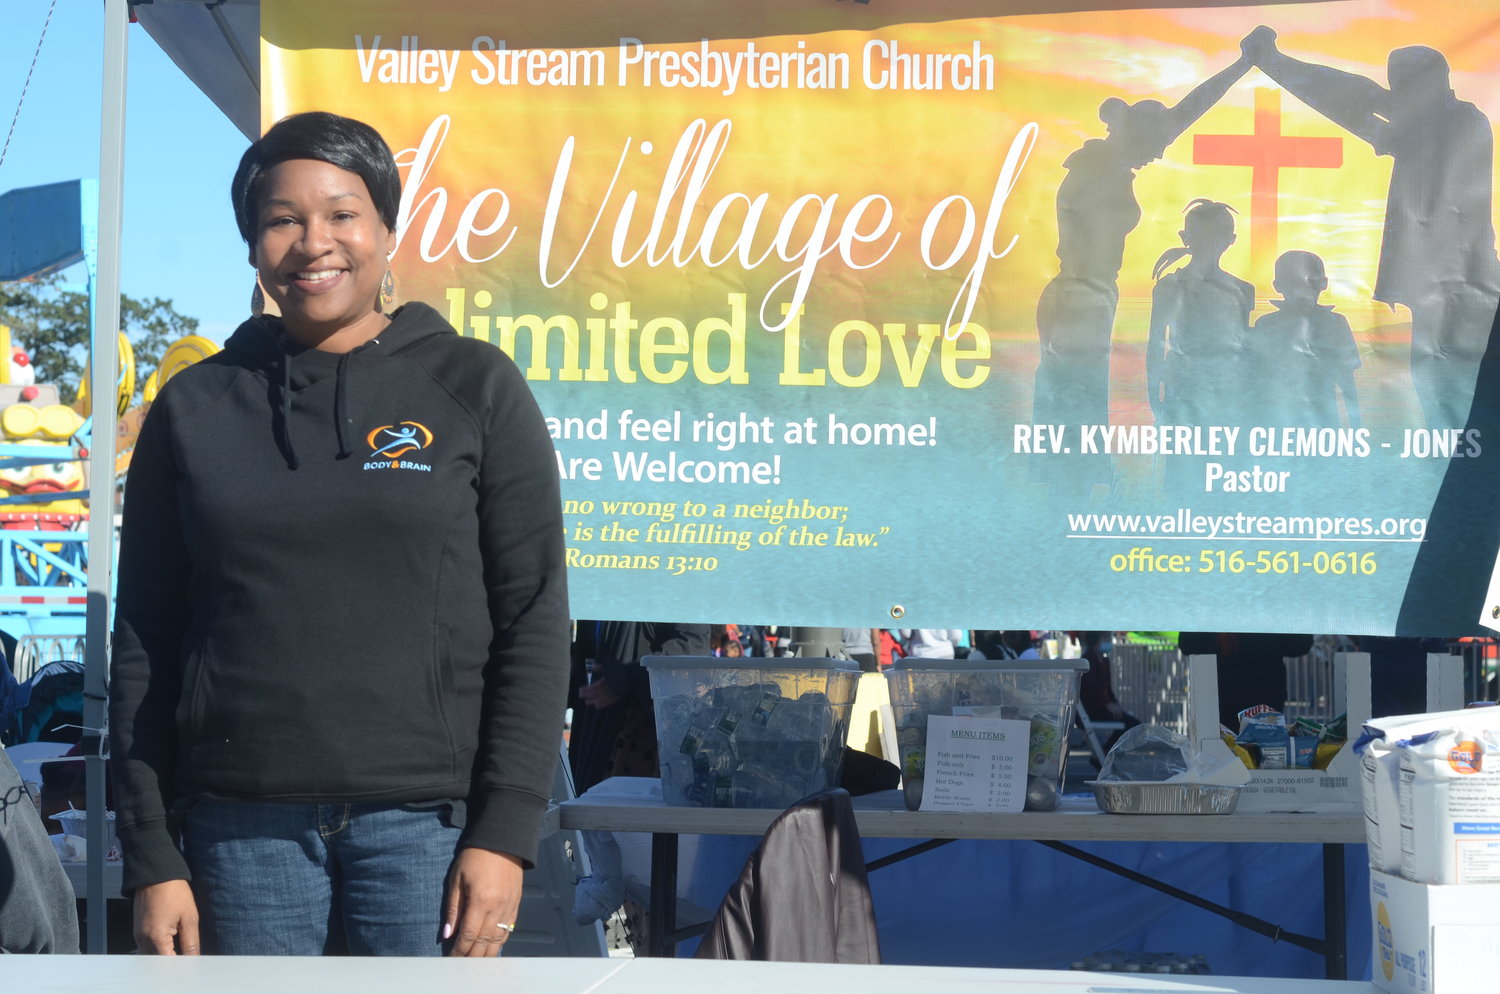 Reverend Kymberley Clemons-Jones, the pastor of Valley Stream Presbyterian Church, greeted families at the church’s annual carnival fundraising event.